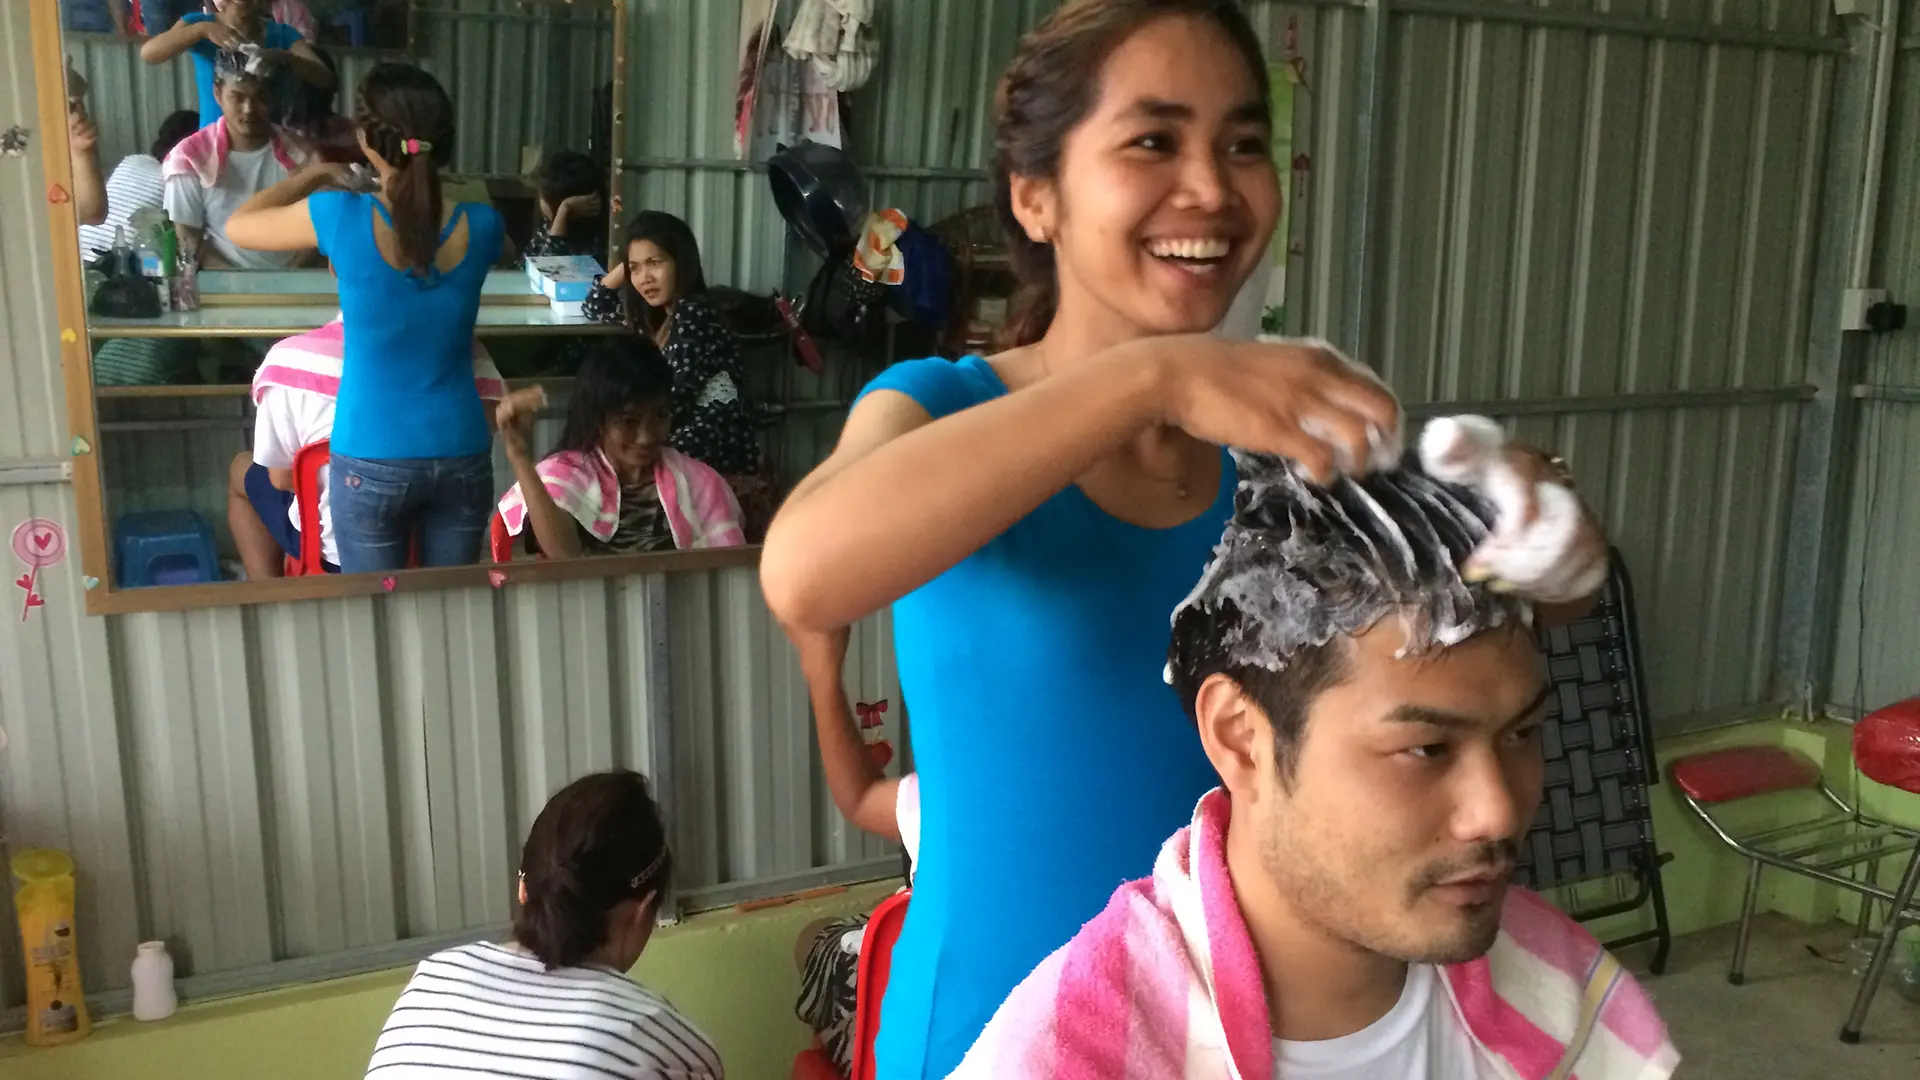 Kea used her talent and motivation and secured herself a job in a salon in Battambang, Cambodia.